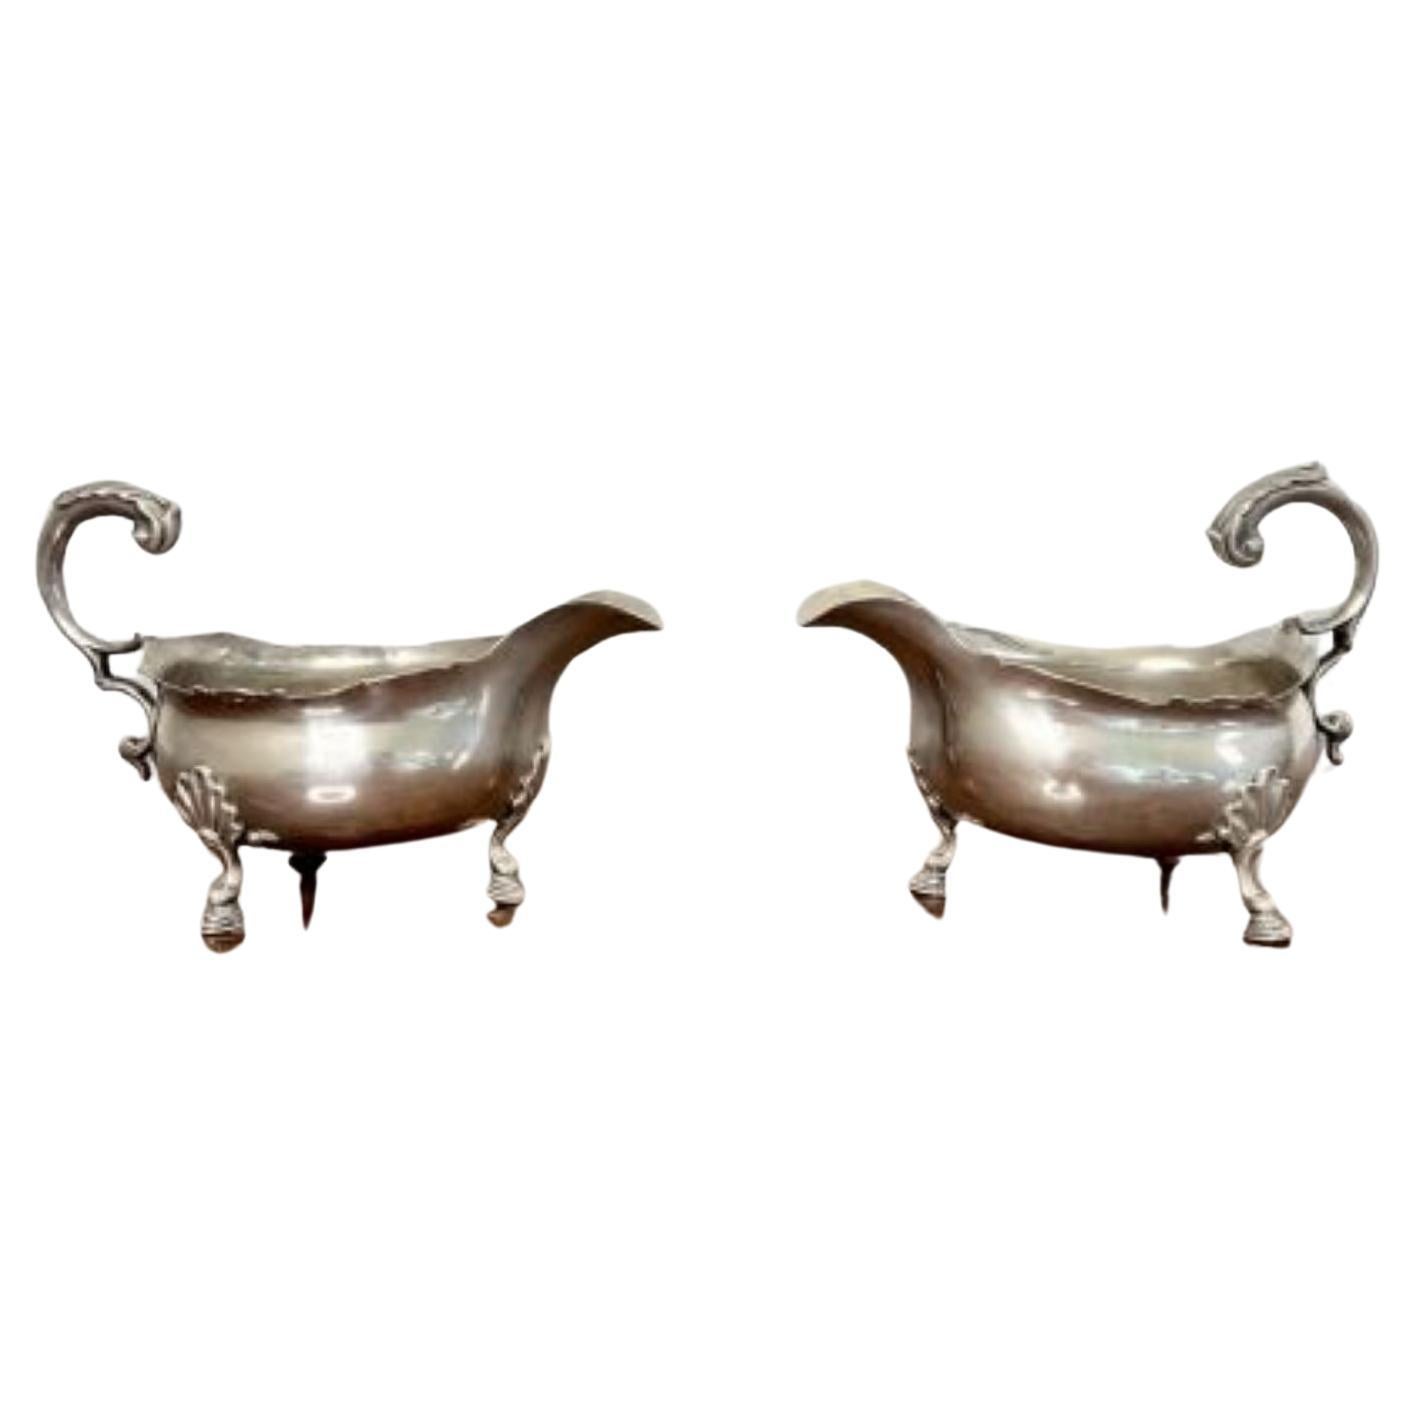 Outstanding quality pair of antique George III silver sauce boats 